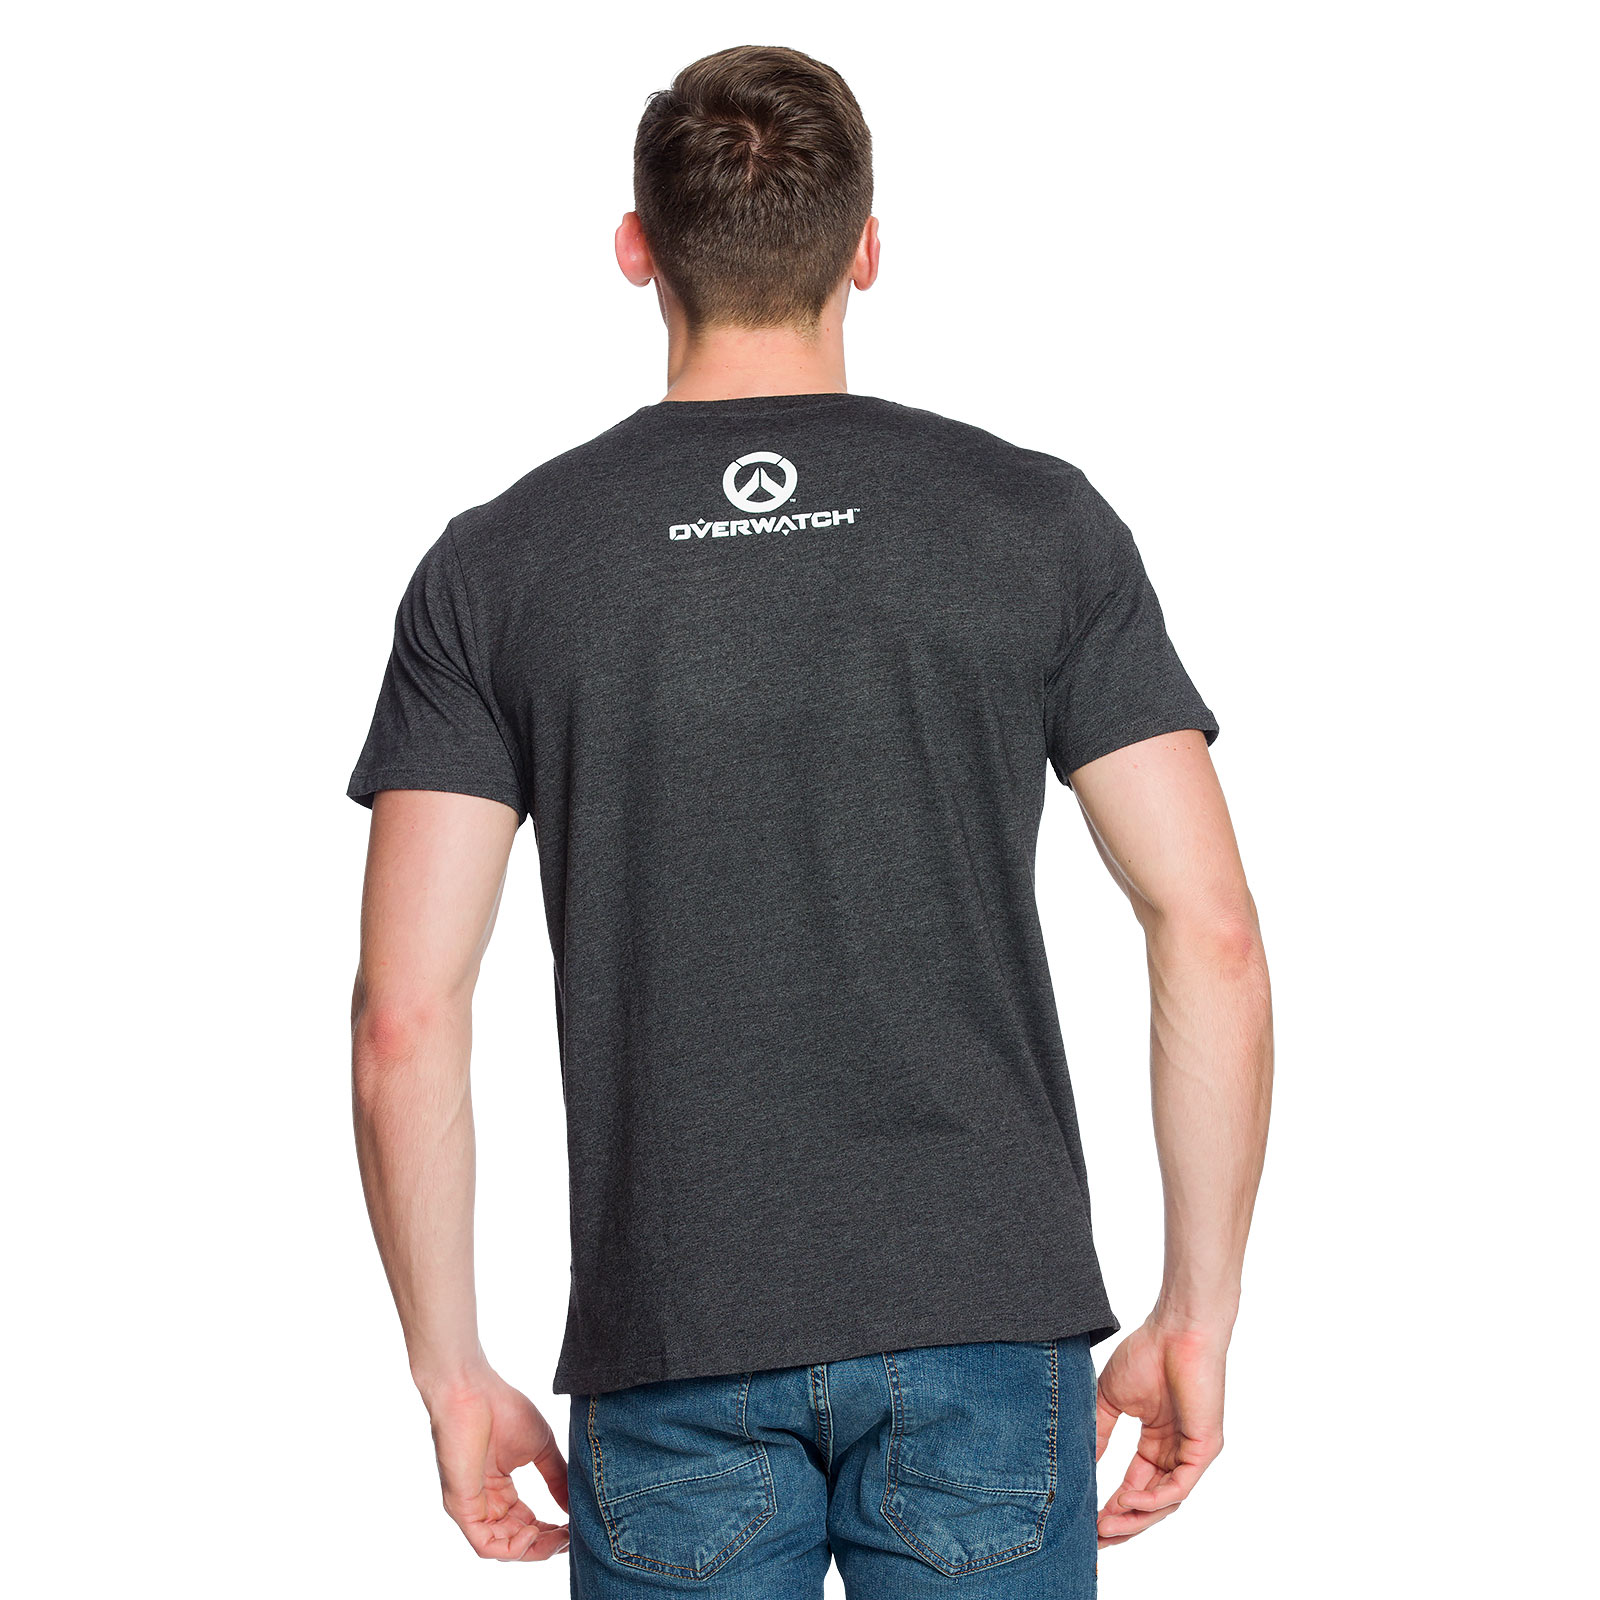 Overwatch - T-shirt Bring Your Friends gris